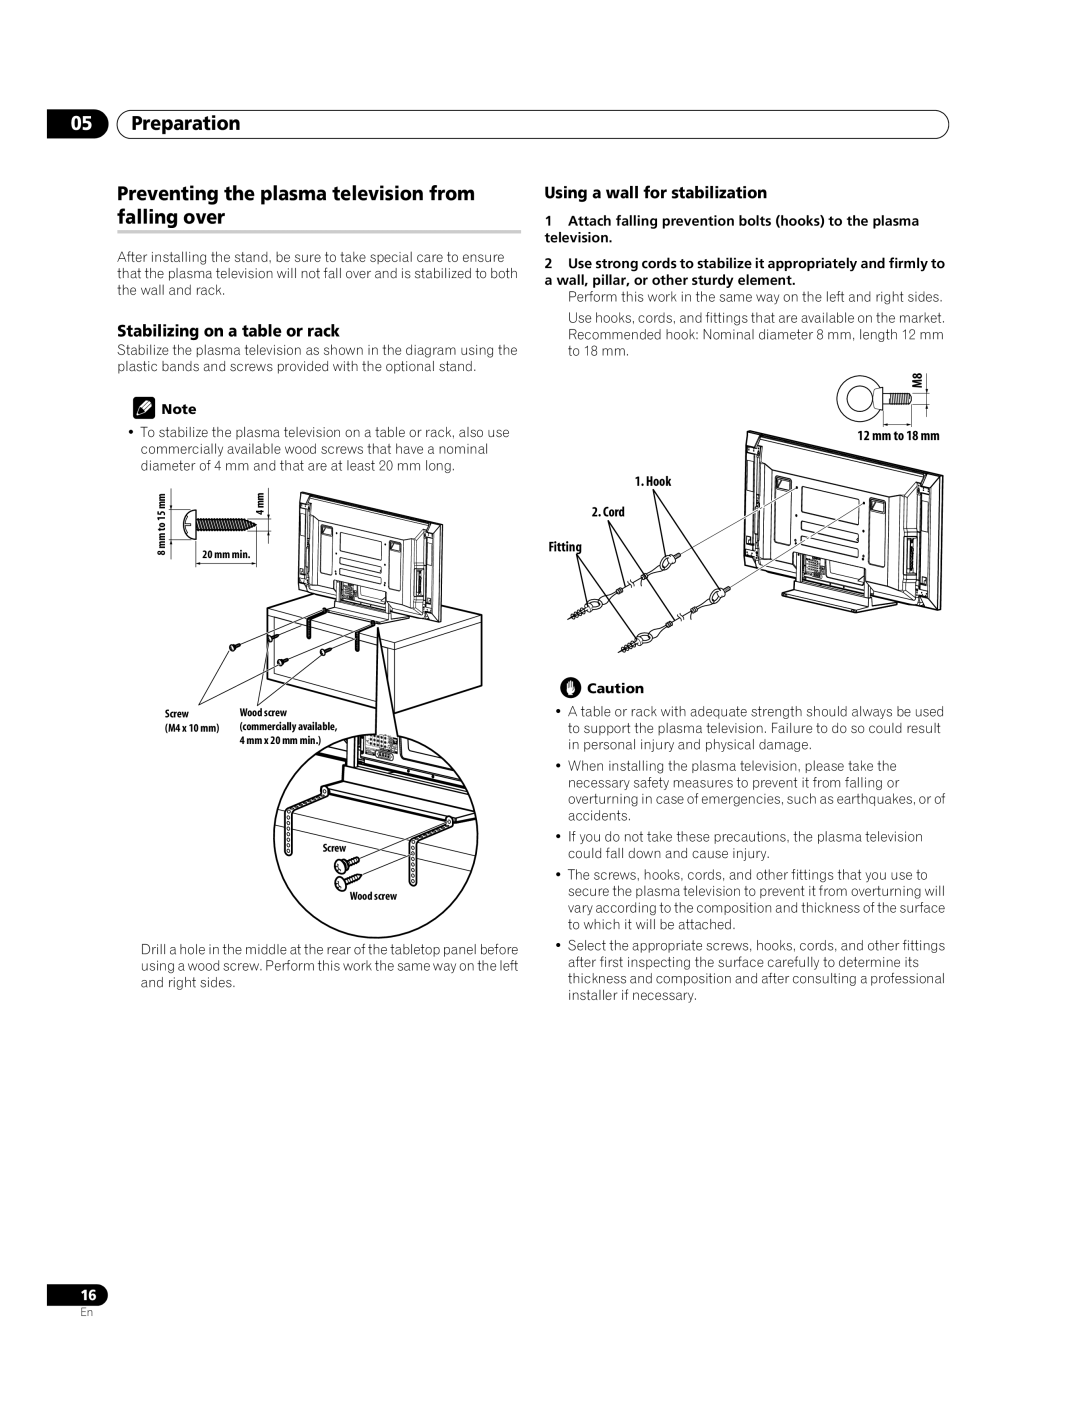 Pioneer PDP-428XDA manual Preparation Preventing the plasma television from falling over, Stabilizing on a table or rack 